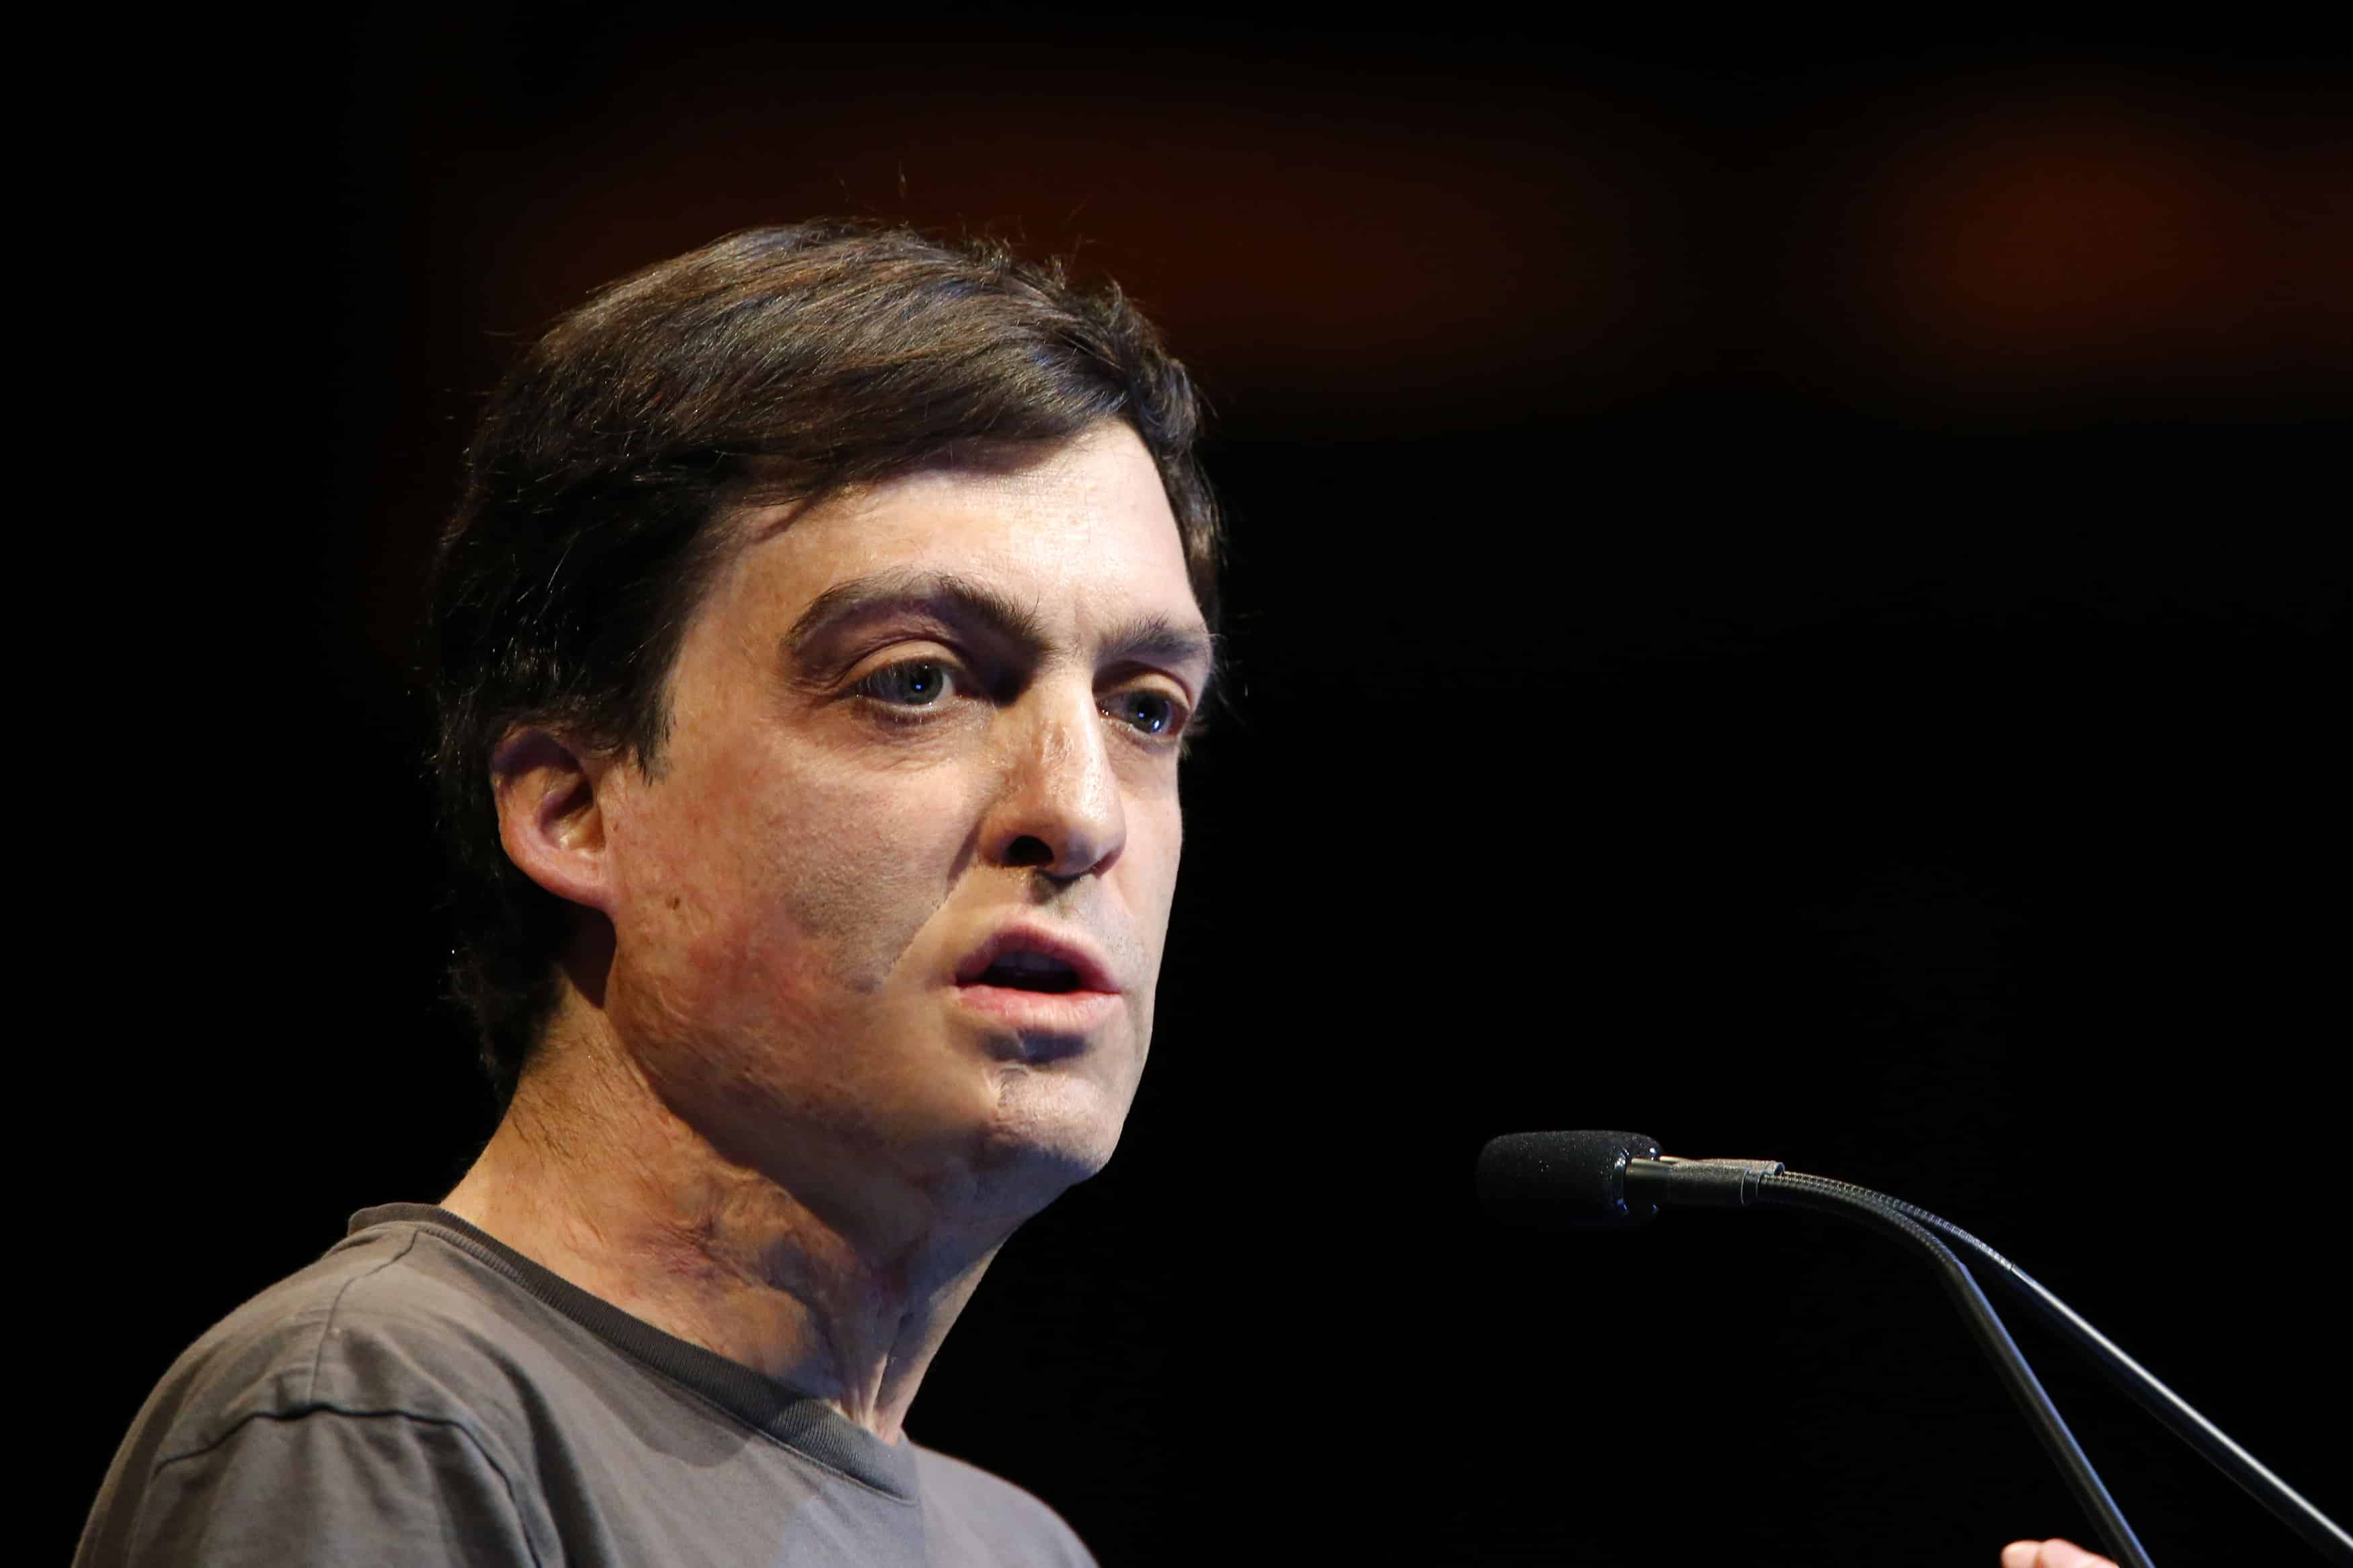 Professor Dan Ariely Joins Colu as Chief Behavioral Officer